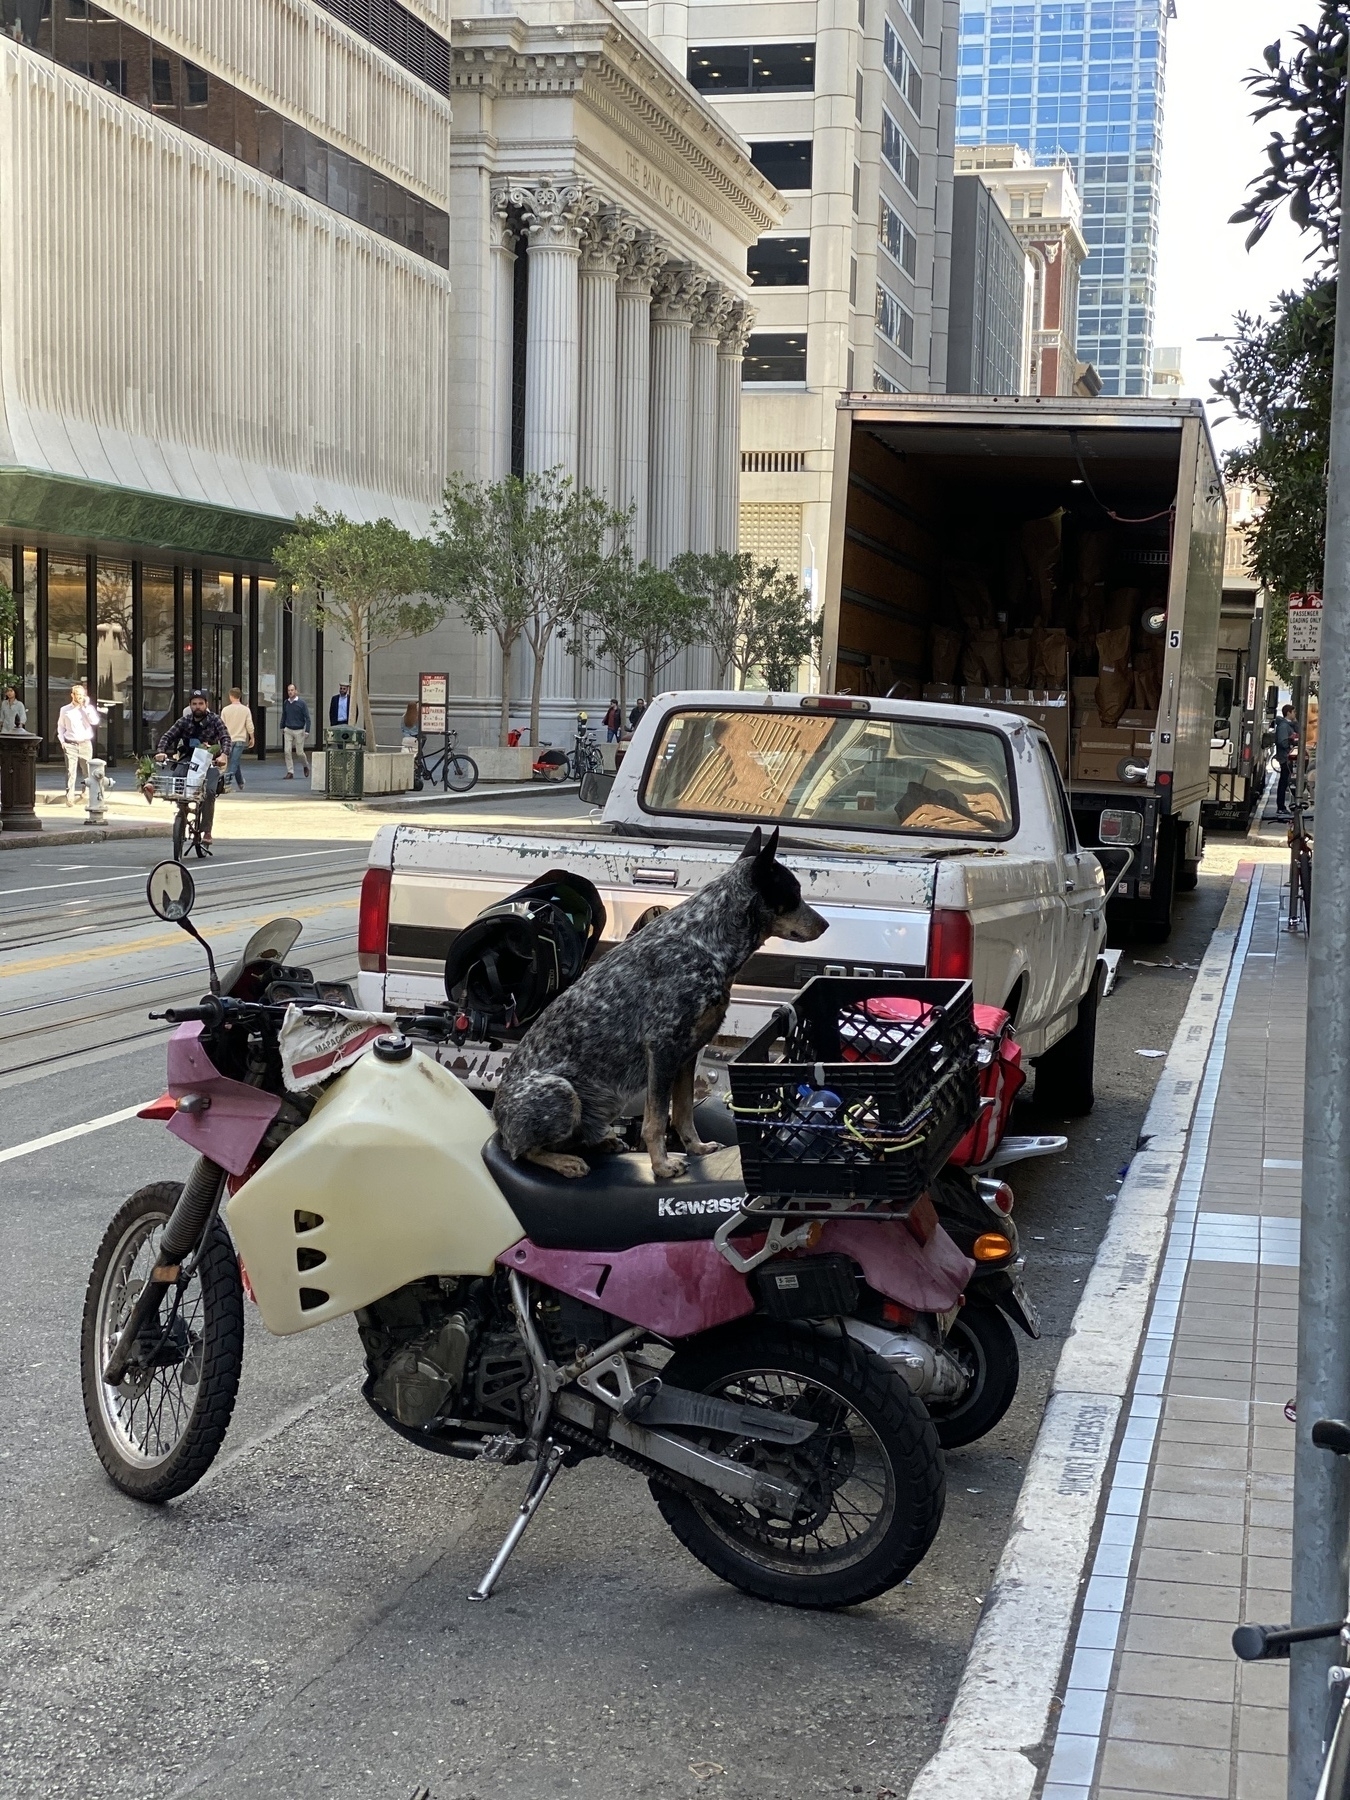 Two motorcycles parked on street and one of them has a dog seated on